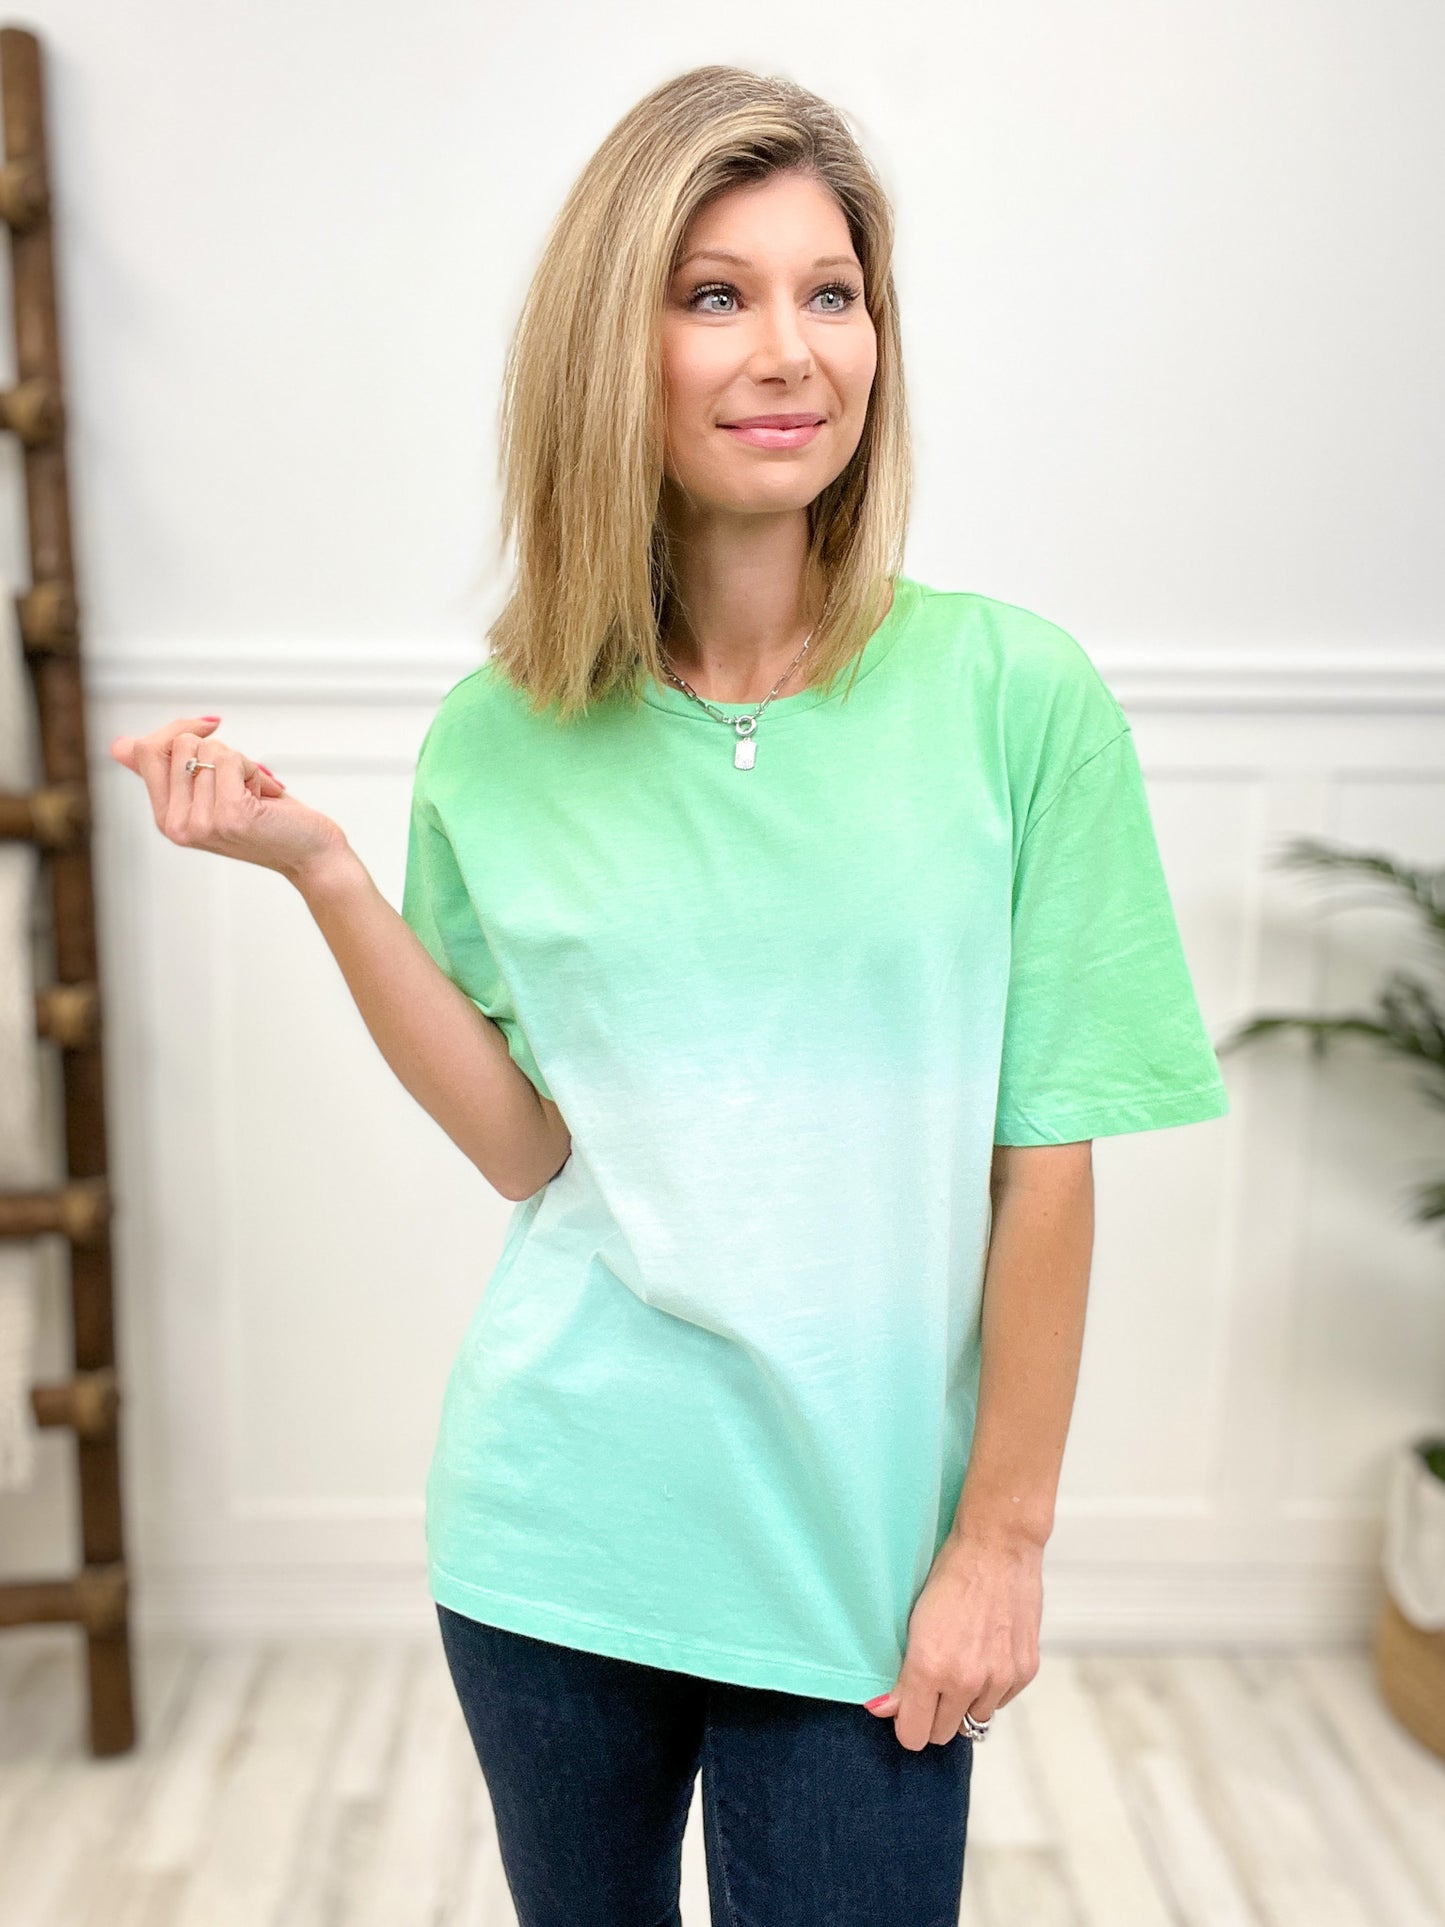 Ride or Dye Boxy Top More Colors!